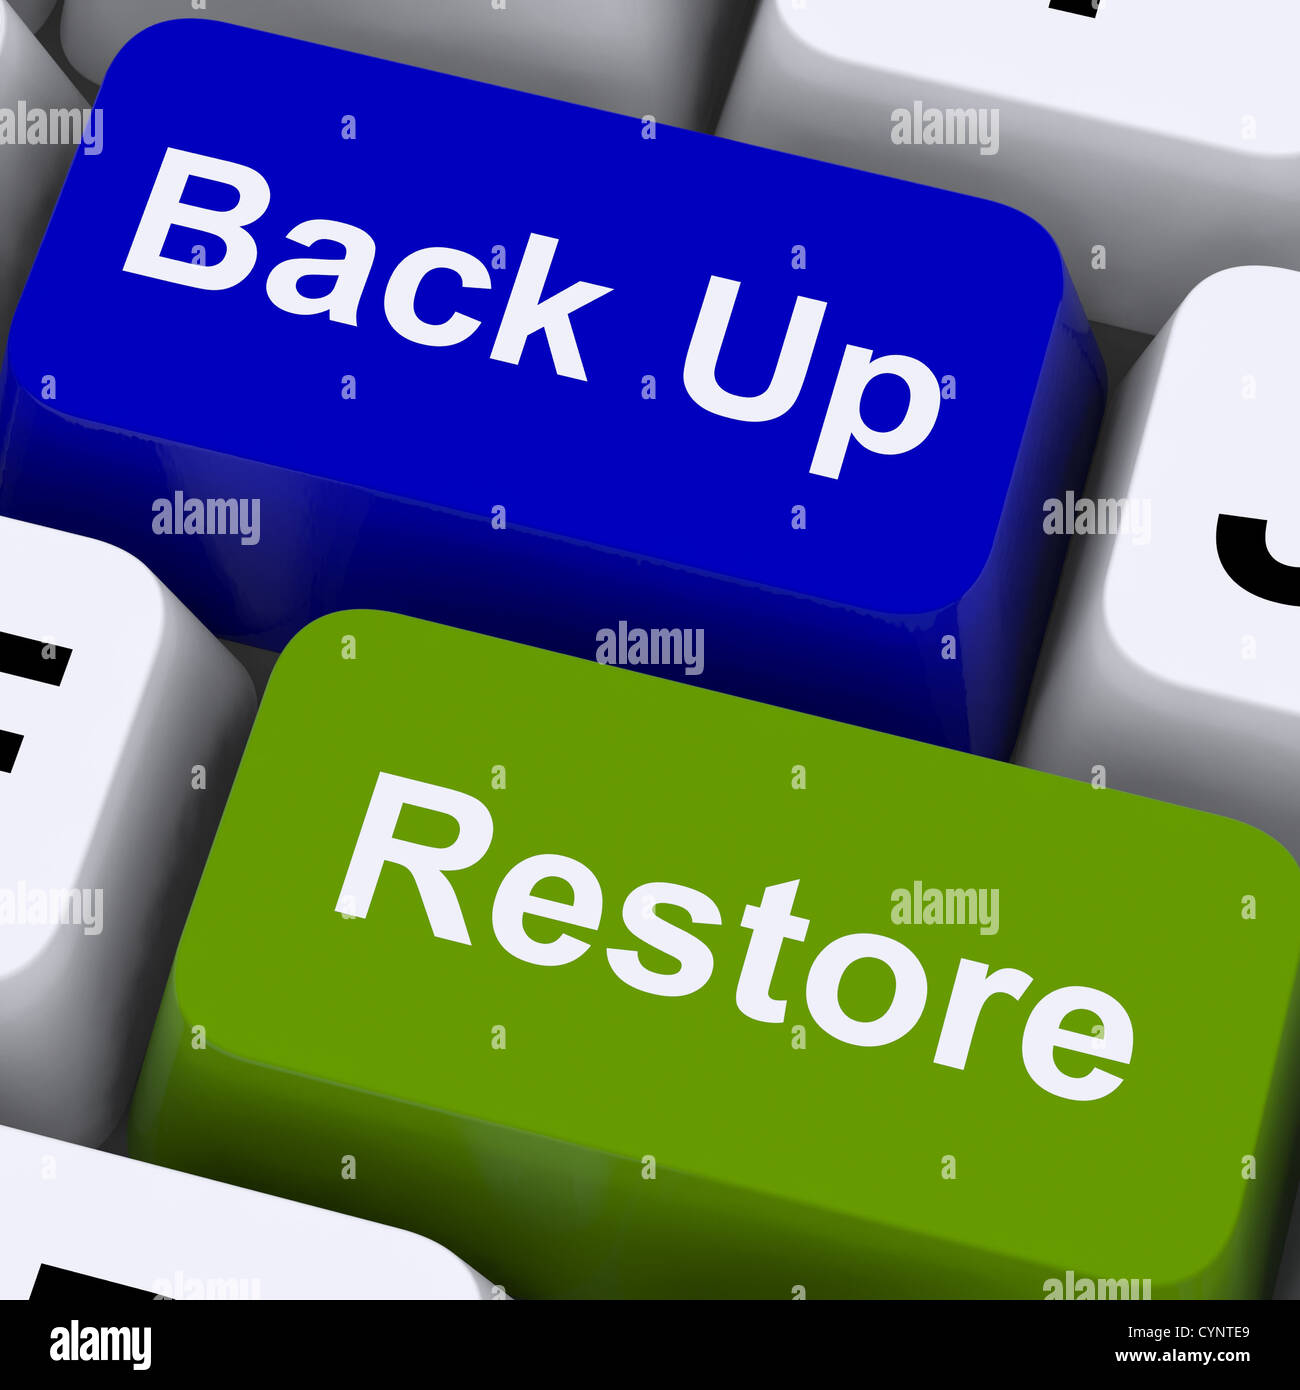 Back Up And Restore Keys For Computer Data Security Stock Photo